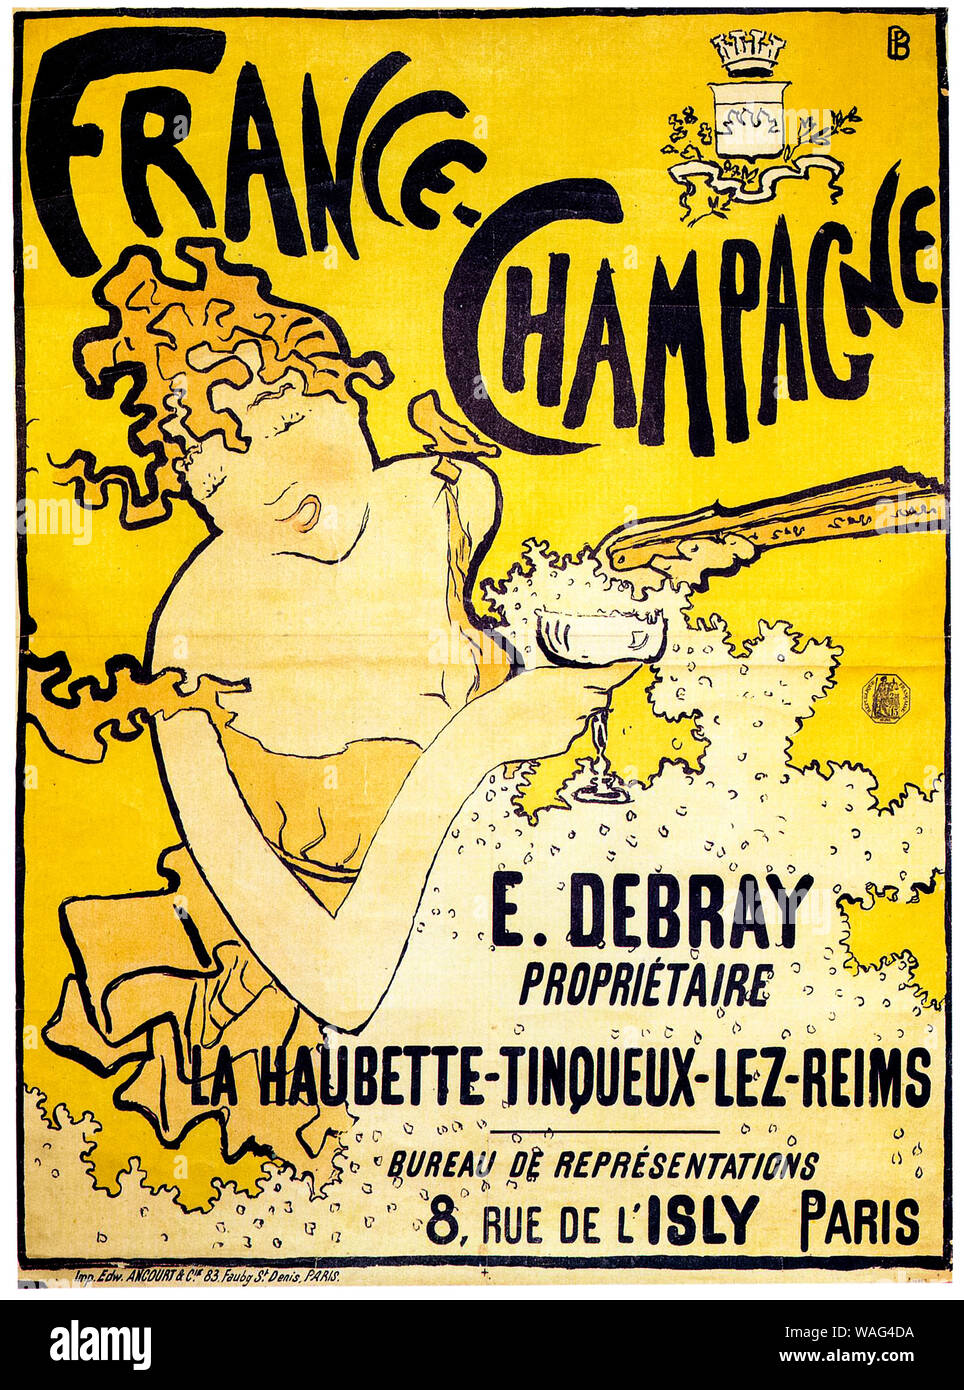 Pierre Bonnard, Poster, advertising, France Champagne, 1891 Stock Photo